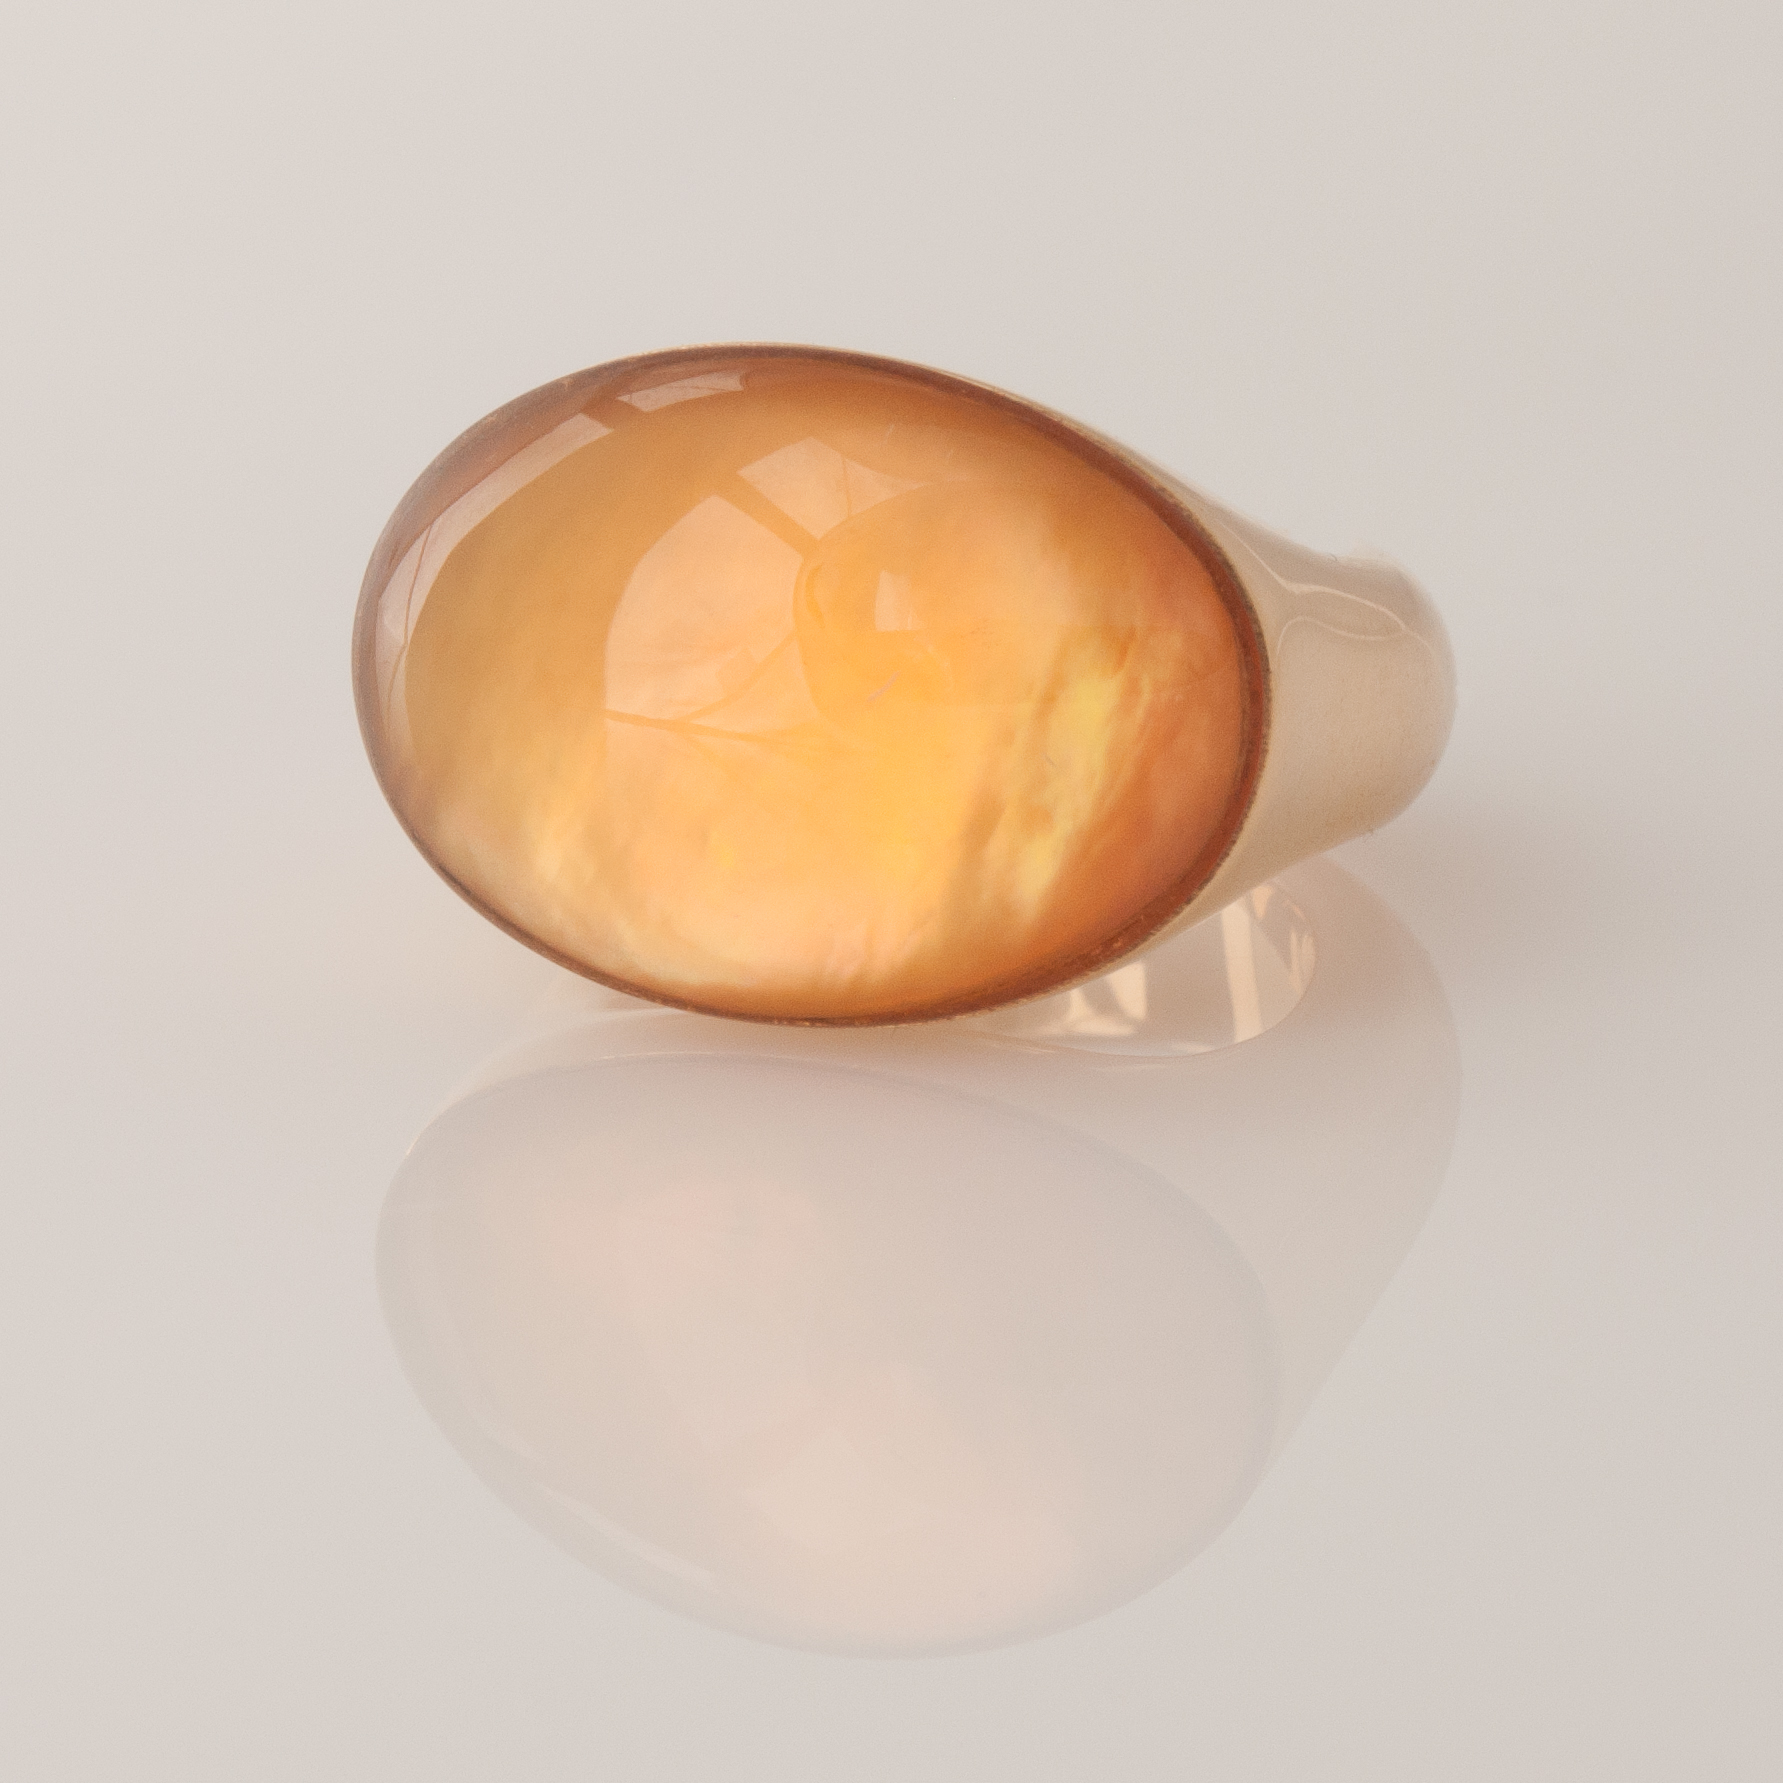 Details about   Ring Black Horn Inlaid Mother of Pearl Ring Indonesia 